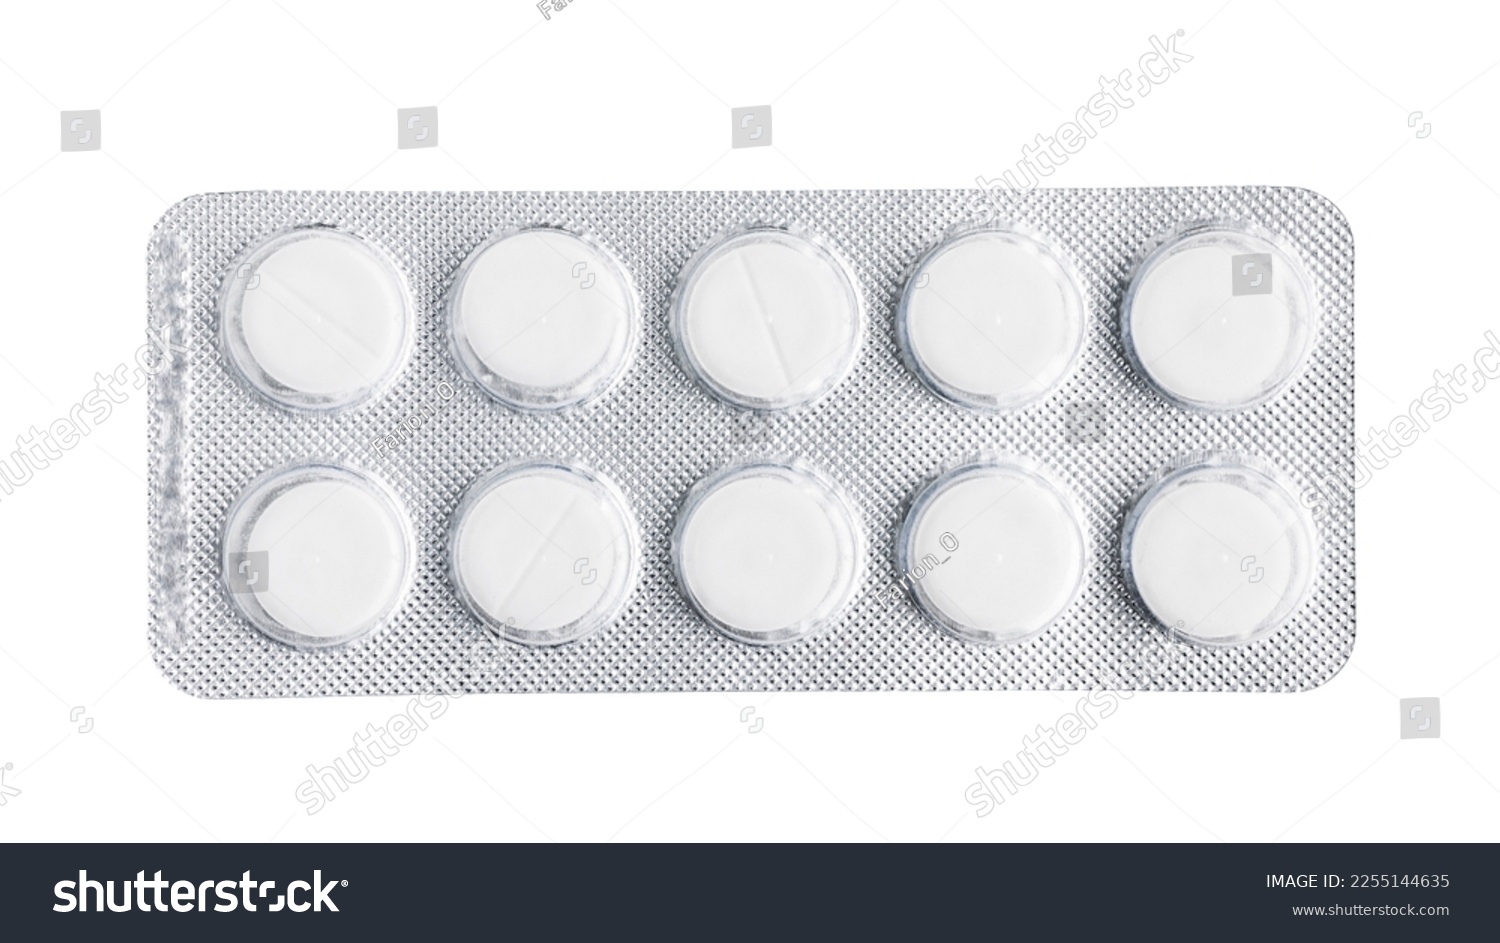 Pills, tablets in a blister pack isolated on white background, top view, healthcare and medicine concept. #2255144635